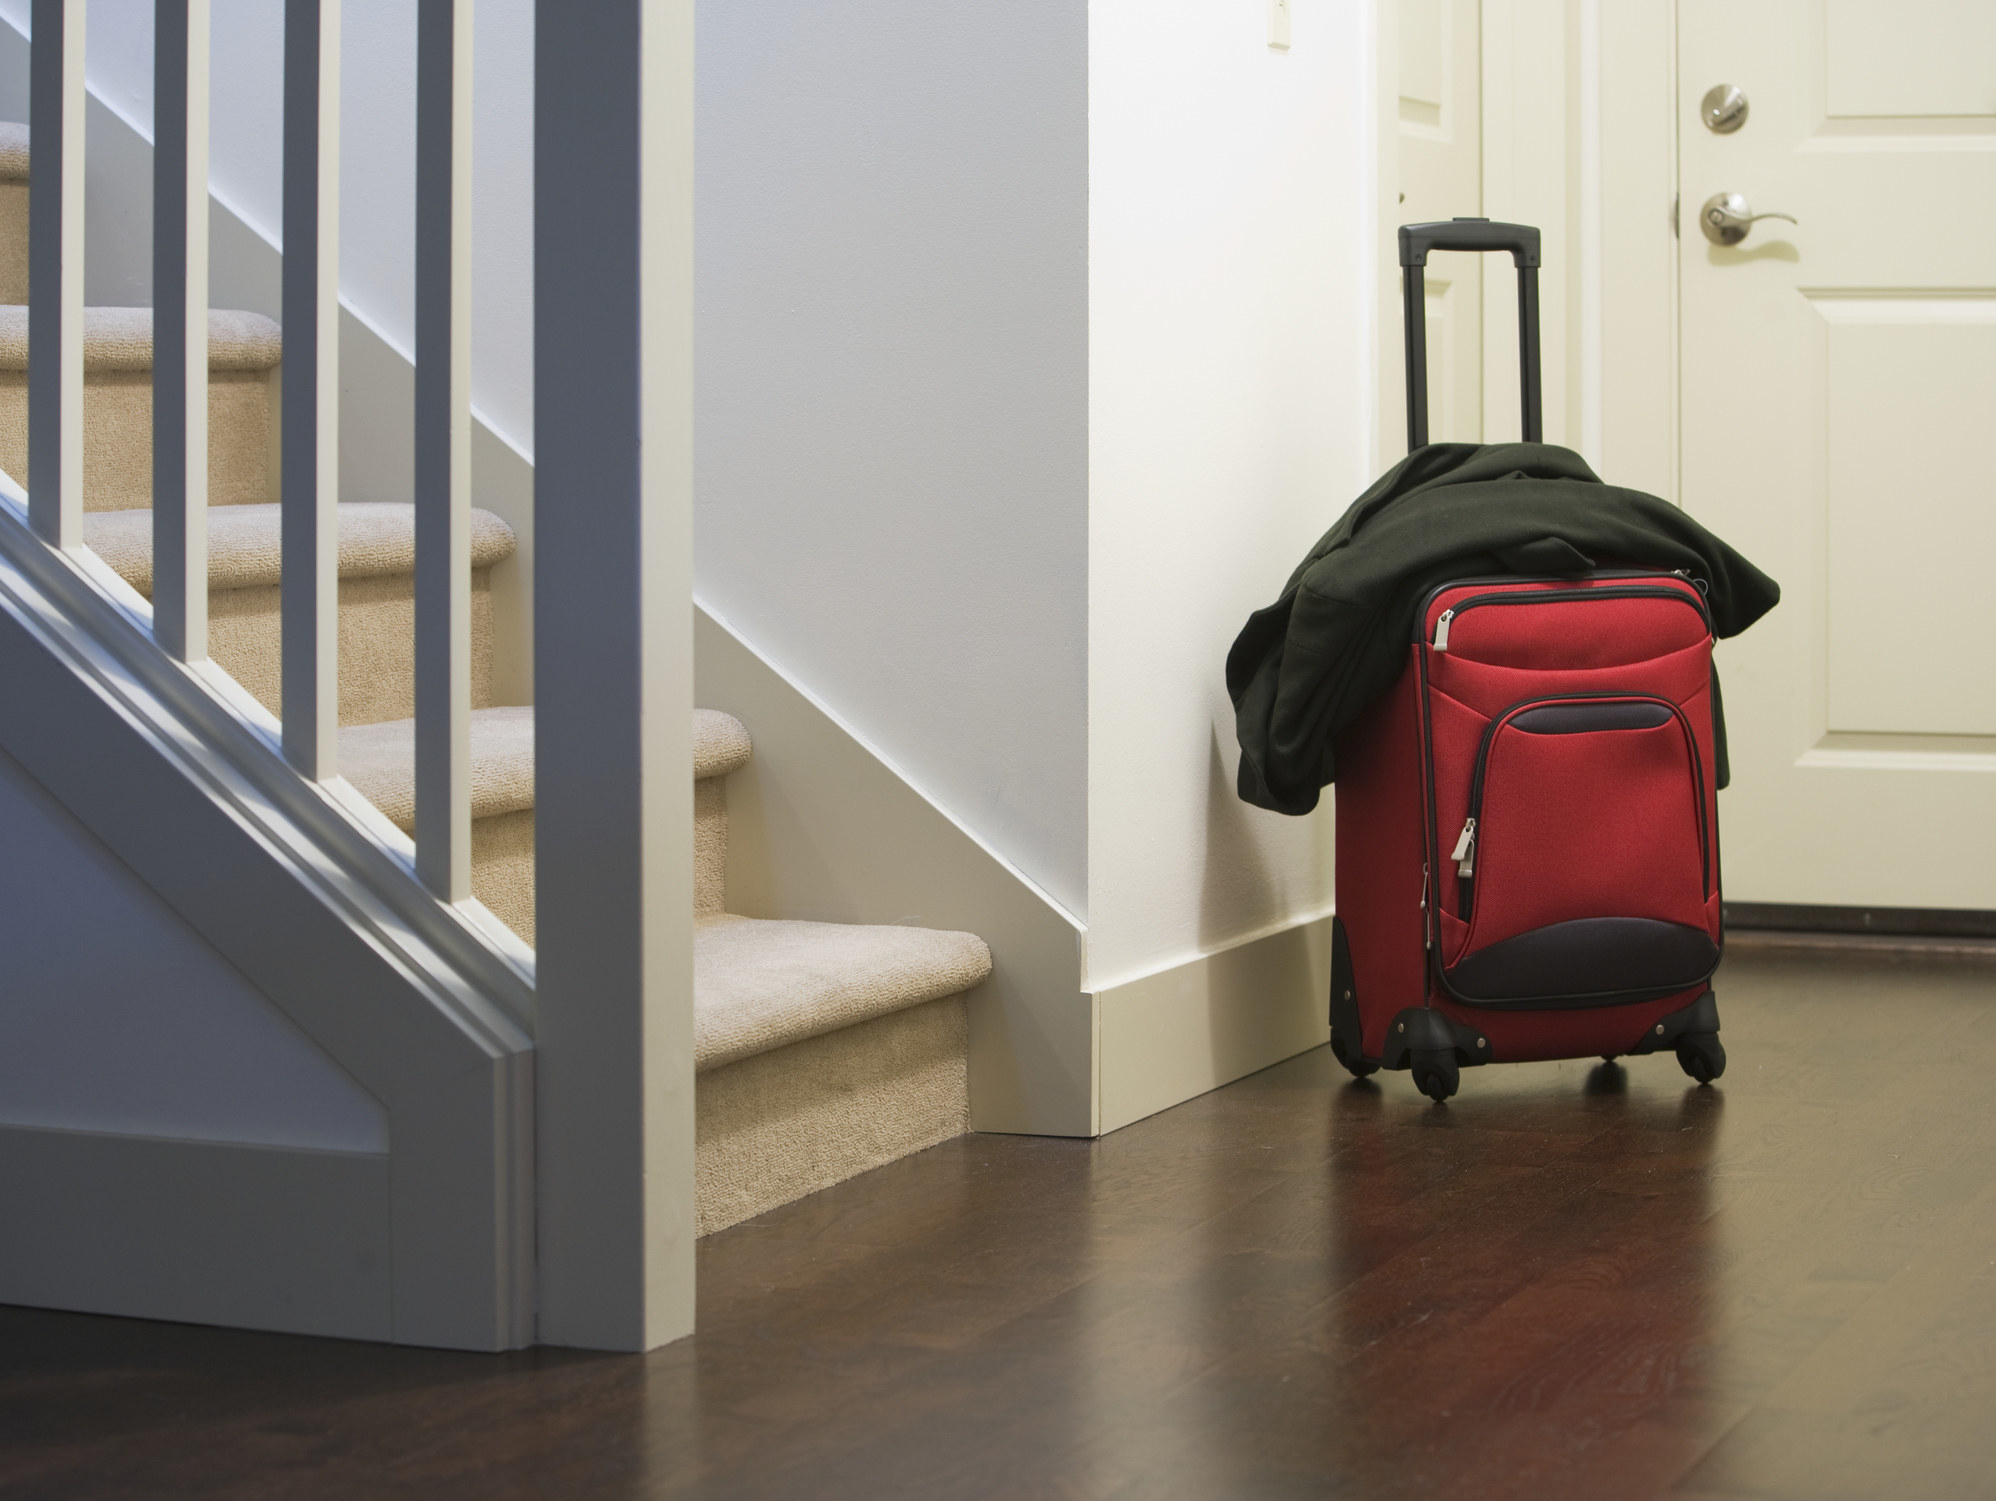 A stock image of a rolling suitcase standing by the door in a house